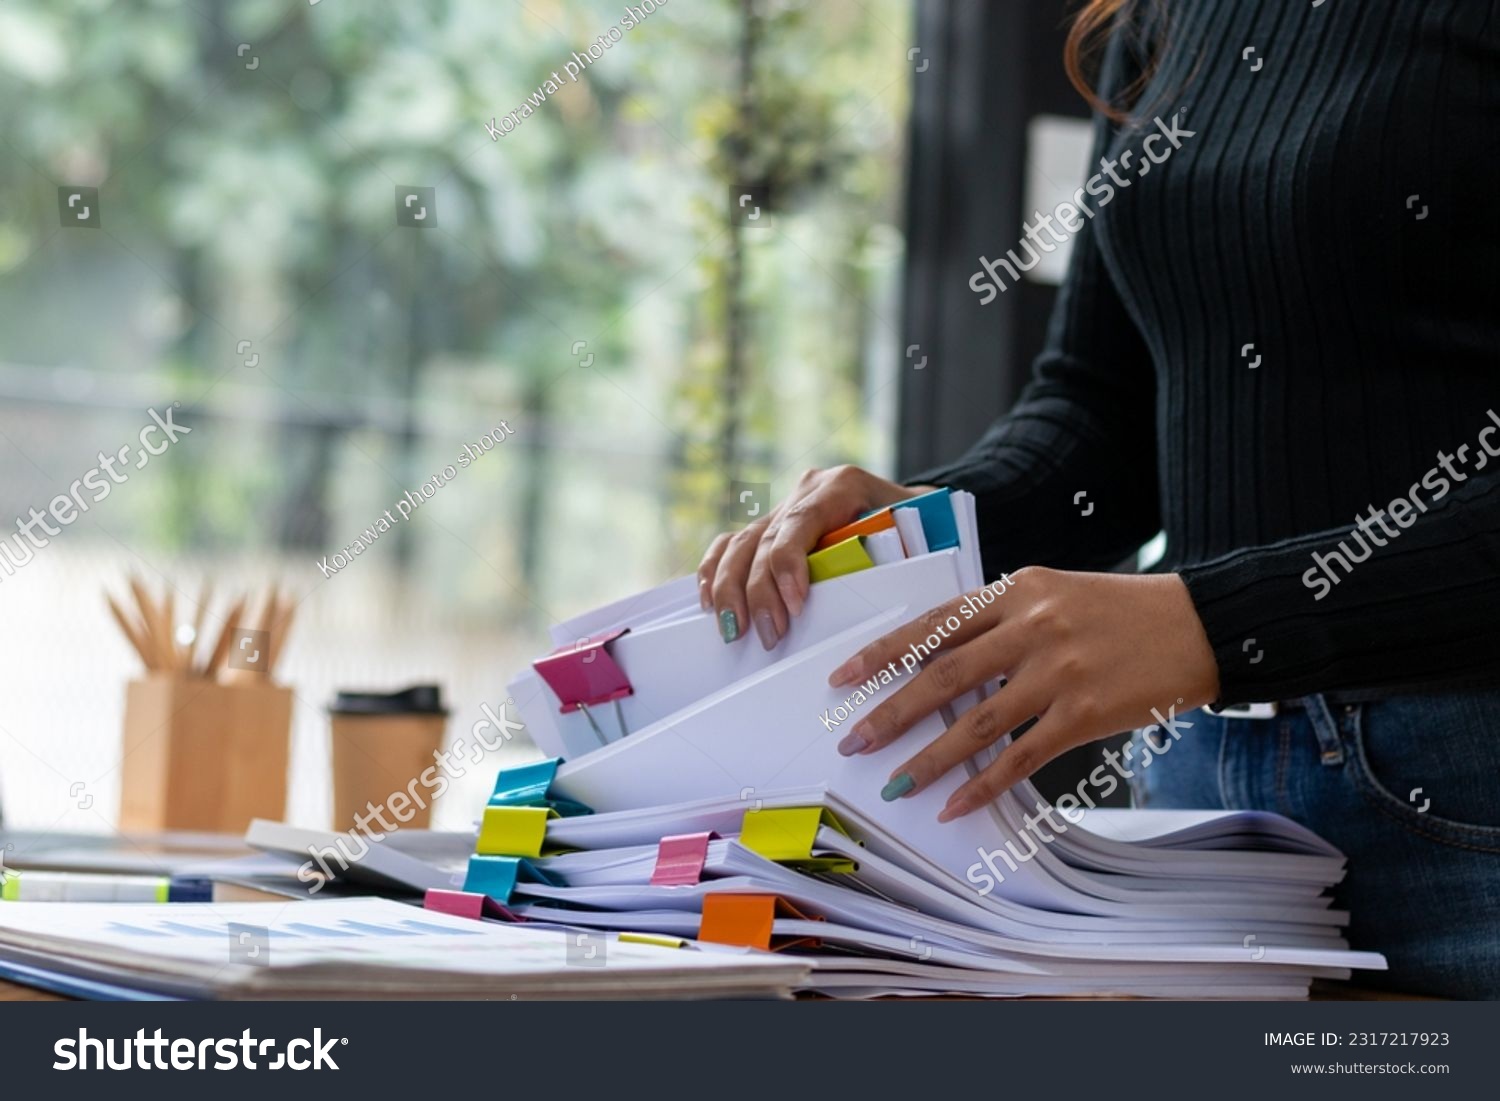 secretary searches through stacked documents on desk in office to find lease within stacked documents just before meeting. concept difficulty in finding hire purchase contract from stacked documents #2317217923